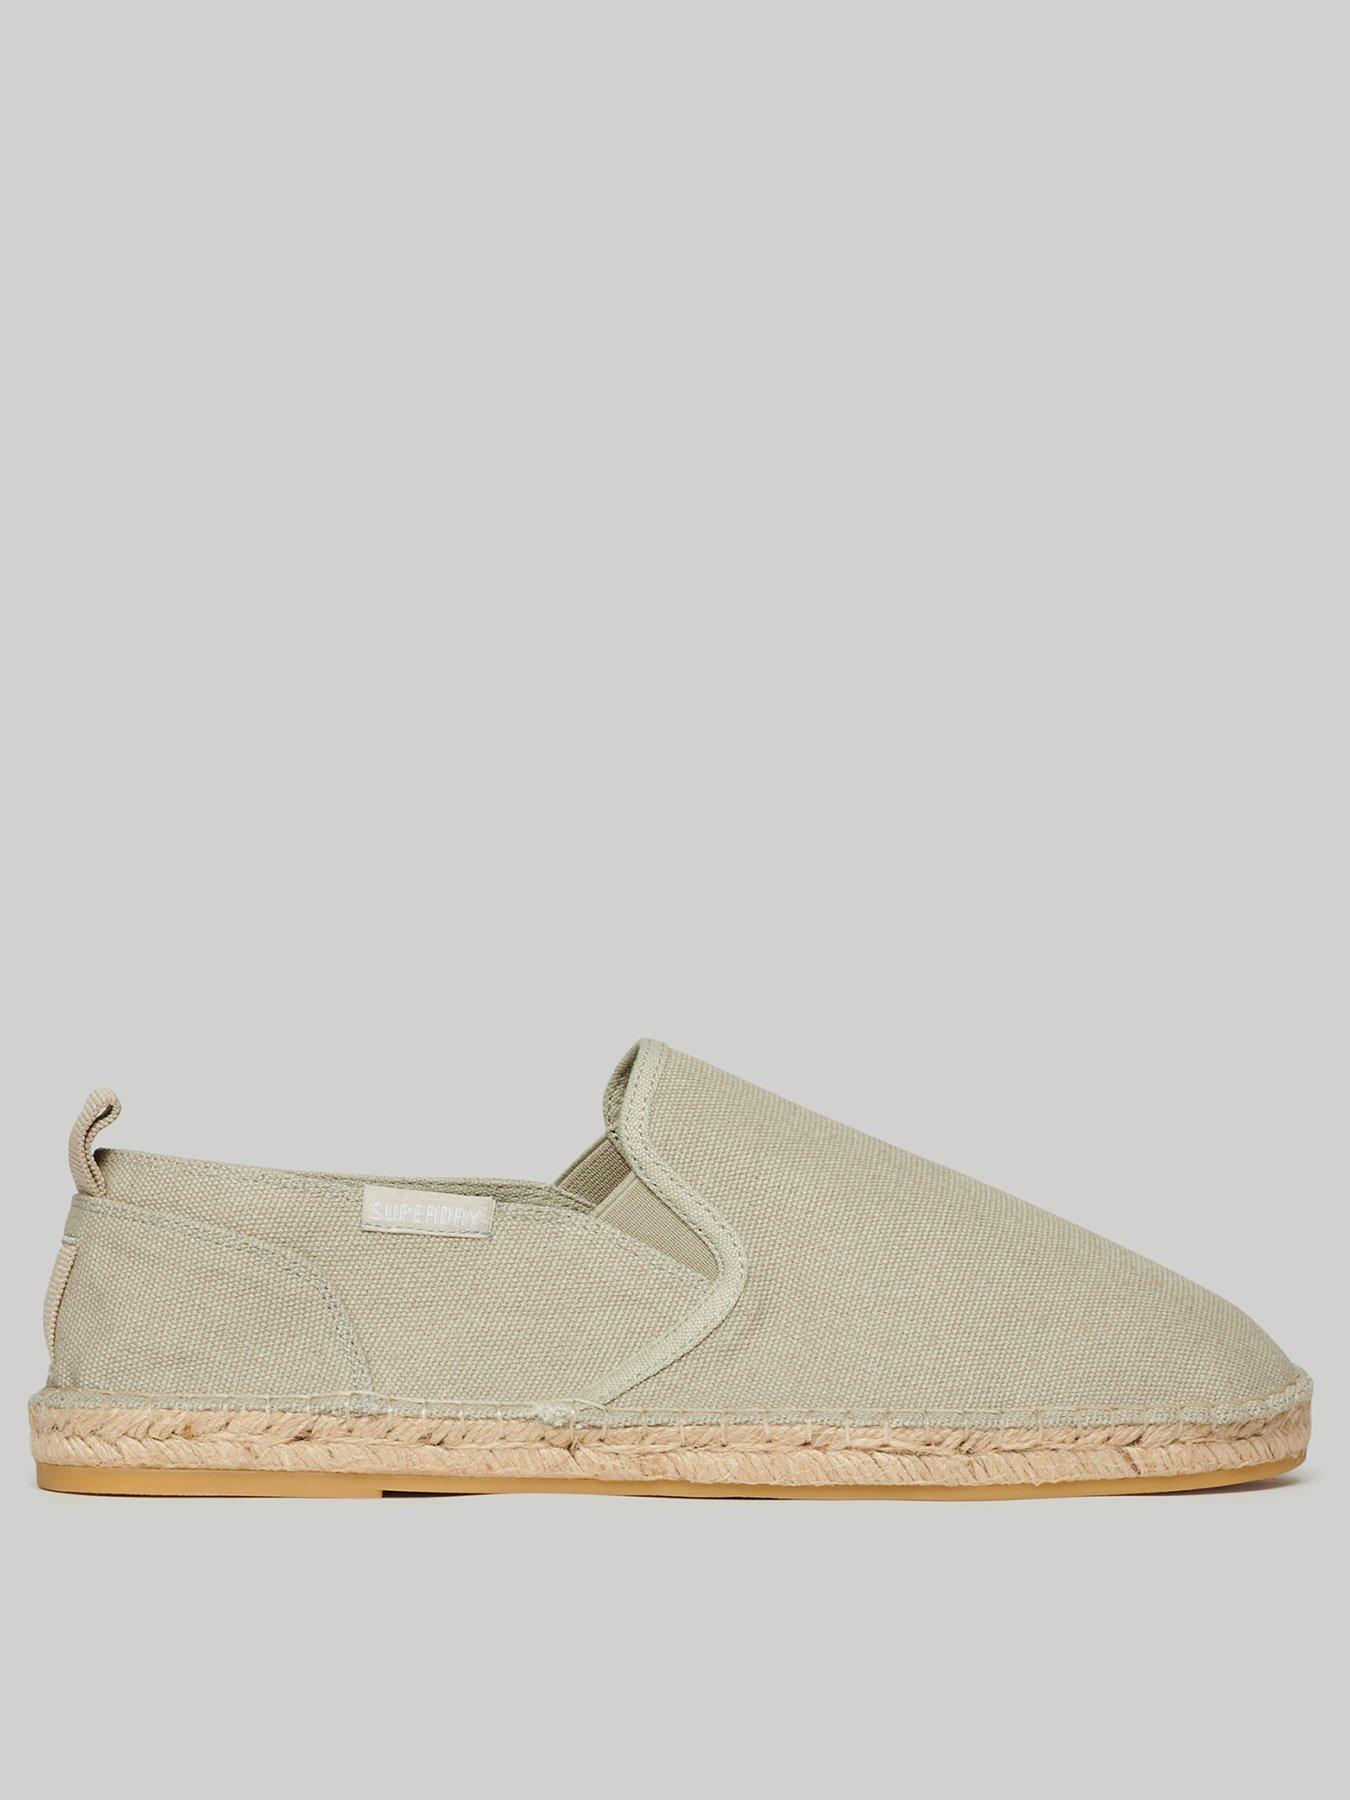 Superdry Canvas Espadrille Shoes - Beige | Very.co.uk